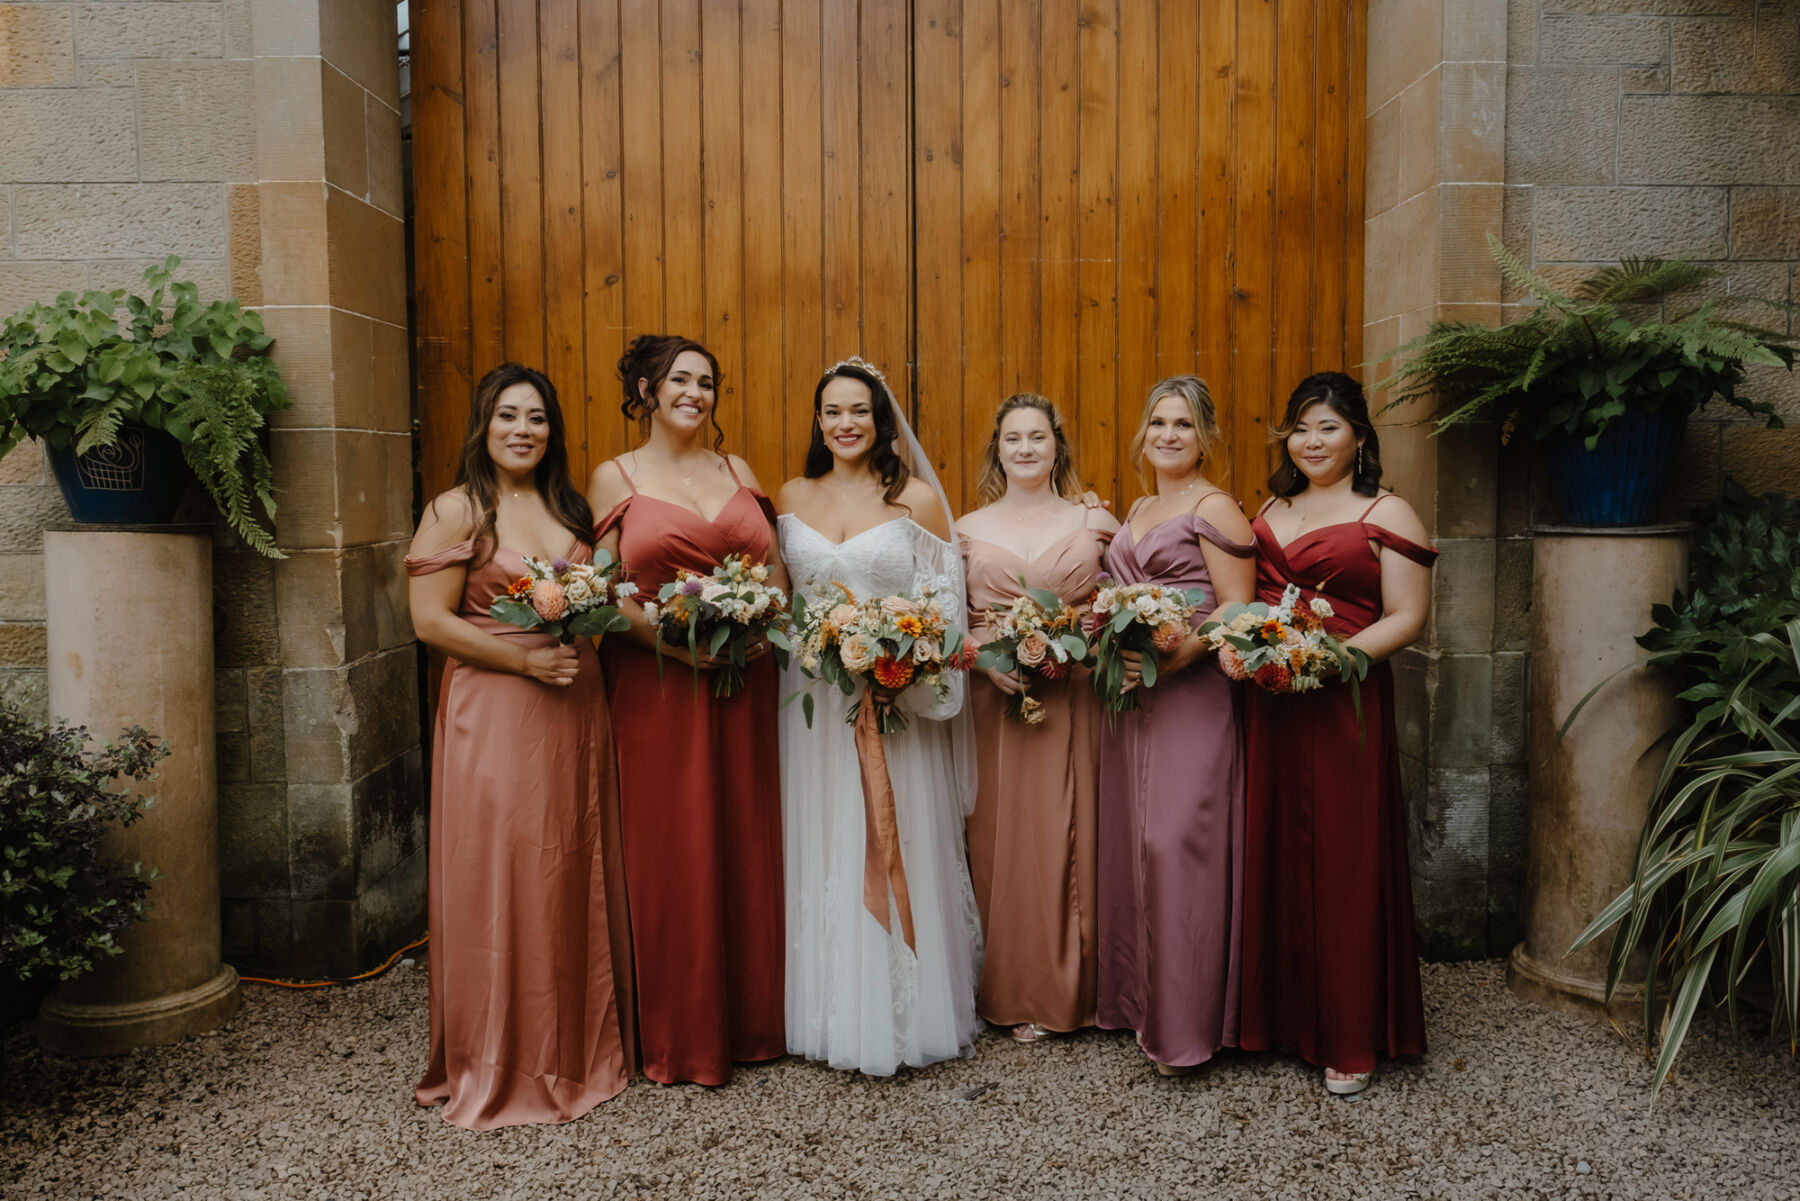 Bridesmaids wearing orange, coral, peach and pale pink wedding dresses by Azazie. The bridesmaids carry Autumn bouquets in soft peach, coral and pink.